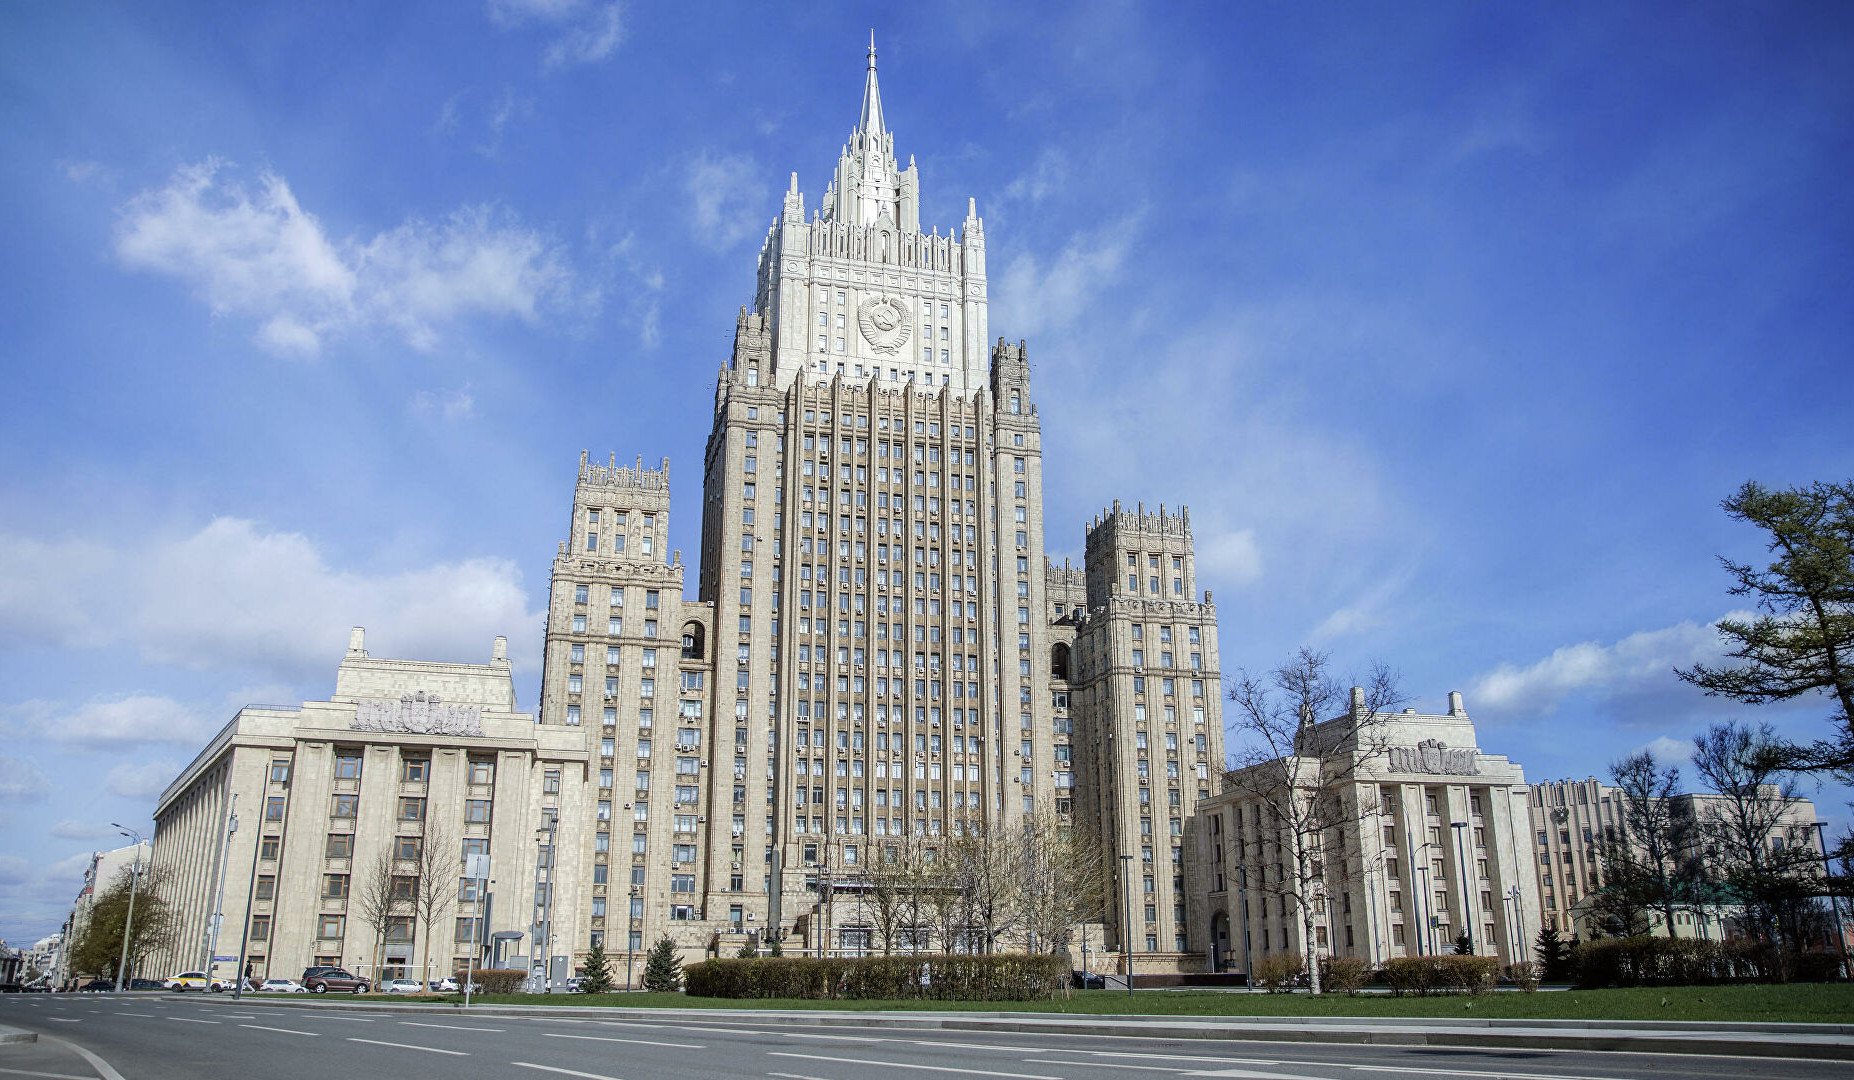 Moscow urges sides in Karabakh to show restraint, honor ceasefire - Russian Foreign Ministry